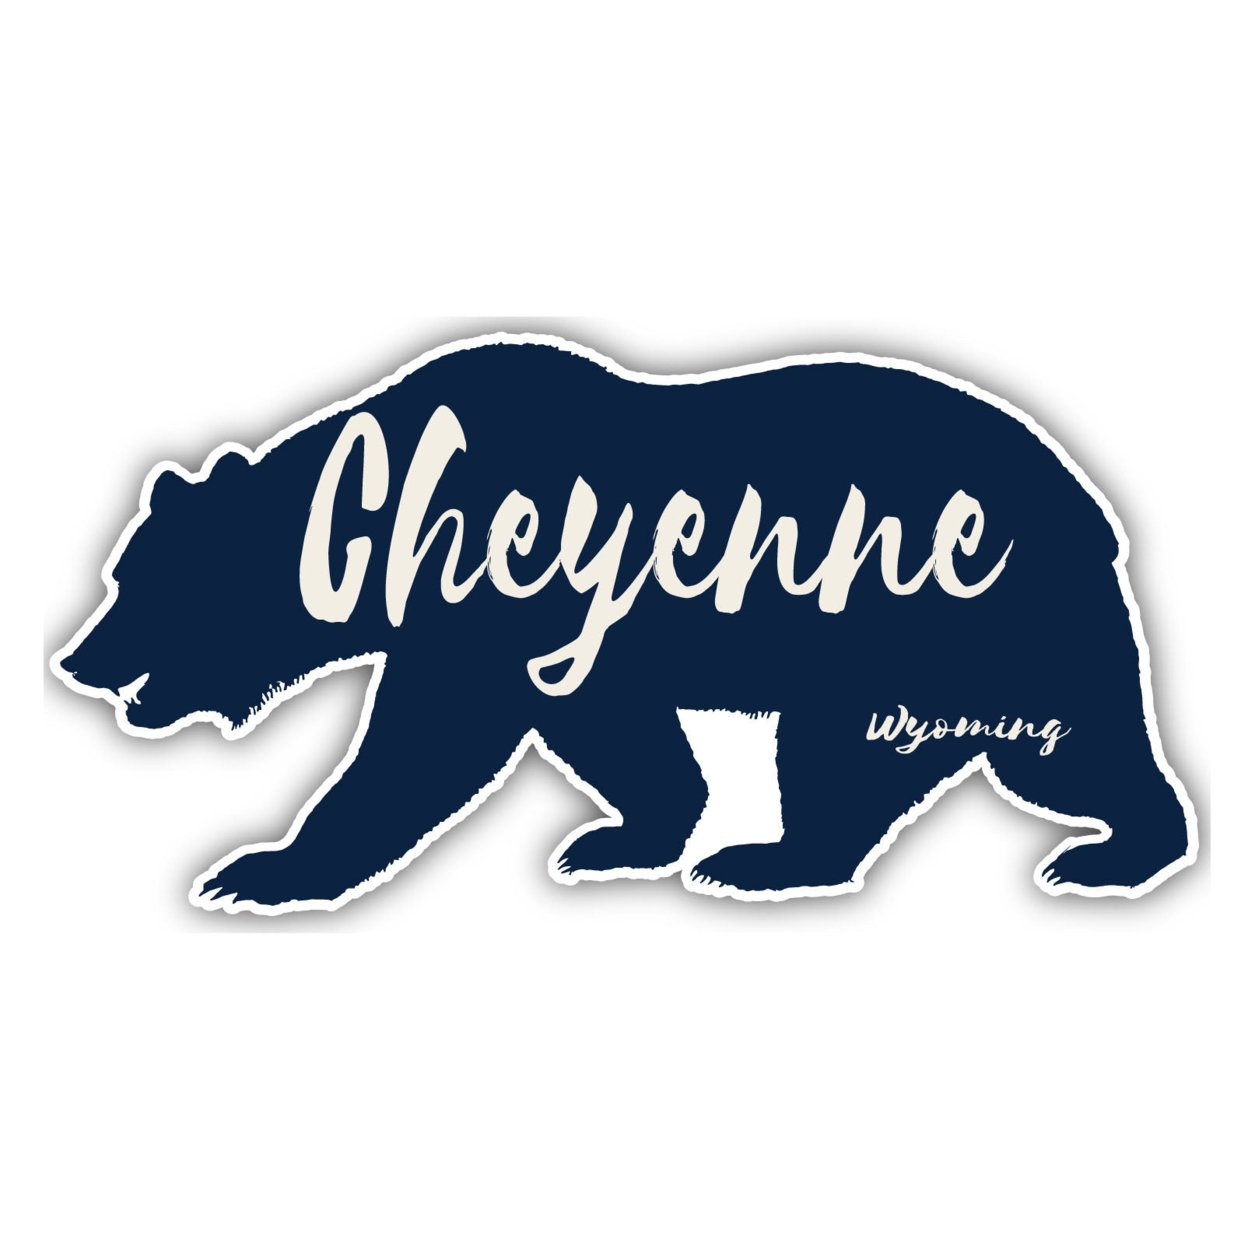 Cheyenne Wyoming Souvenir Decorative Stickers (Choose Theme And Size) - 4-Pack, 8-Inch, Tent